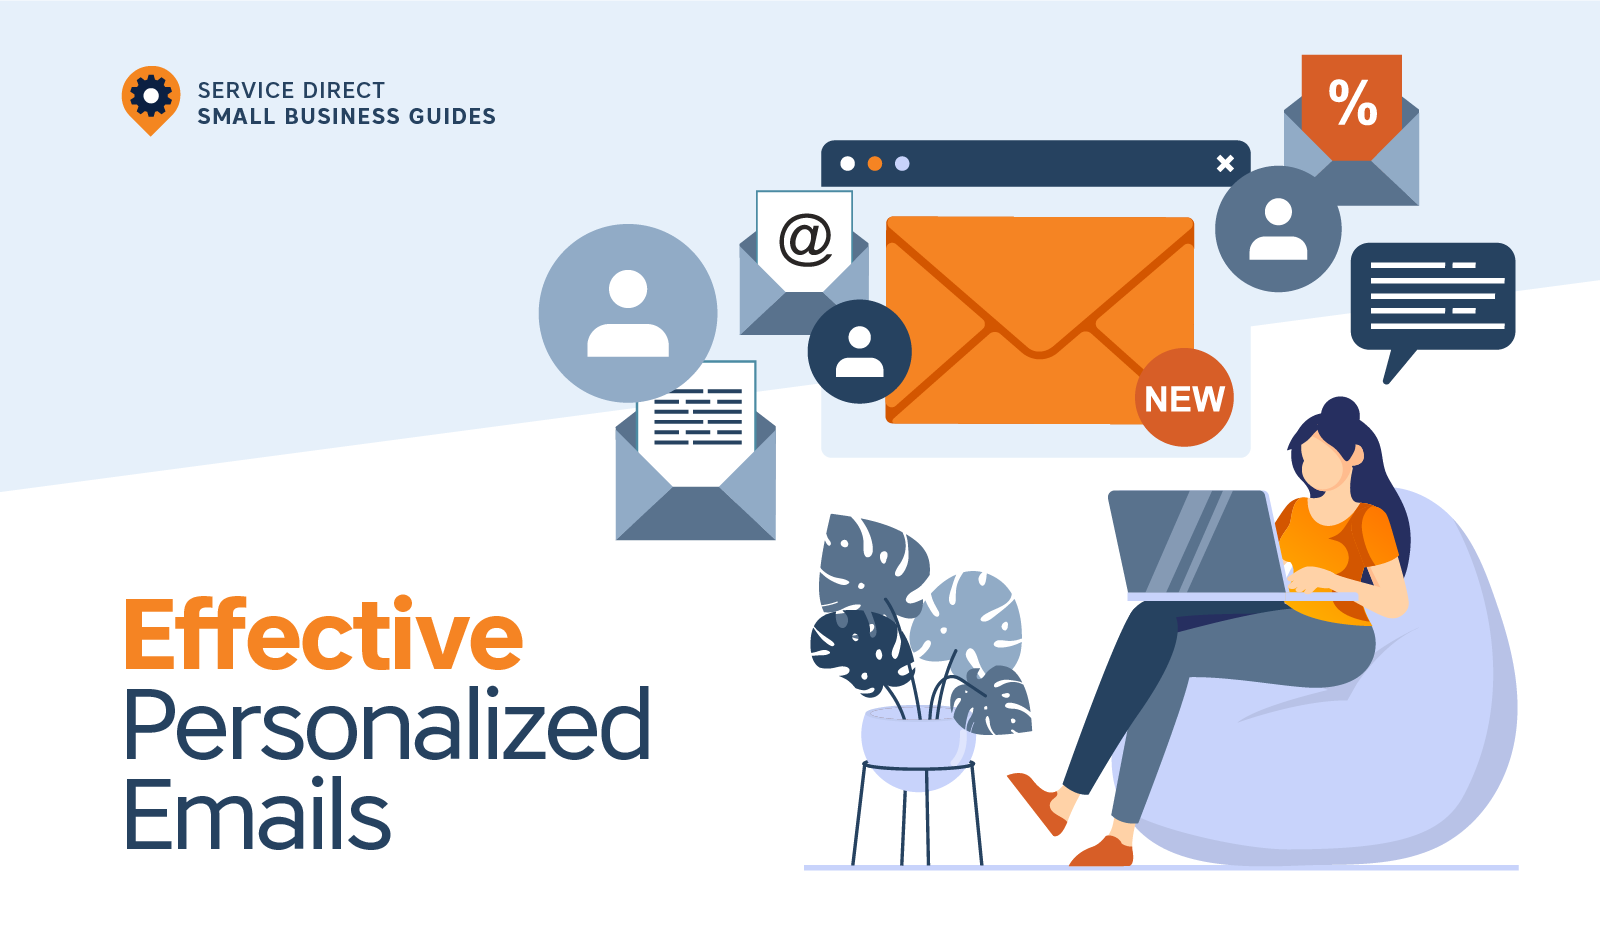 How to Personalize Emails to Make Them More Effective